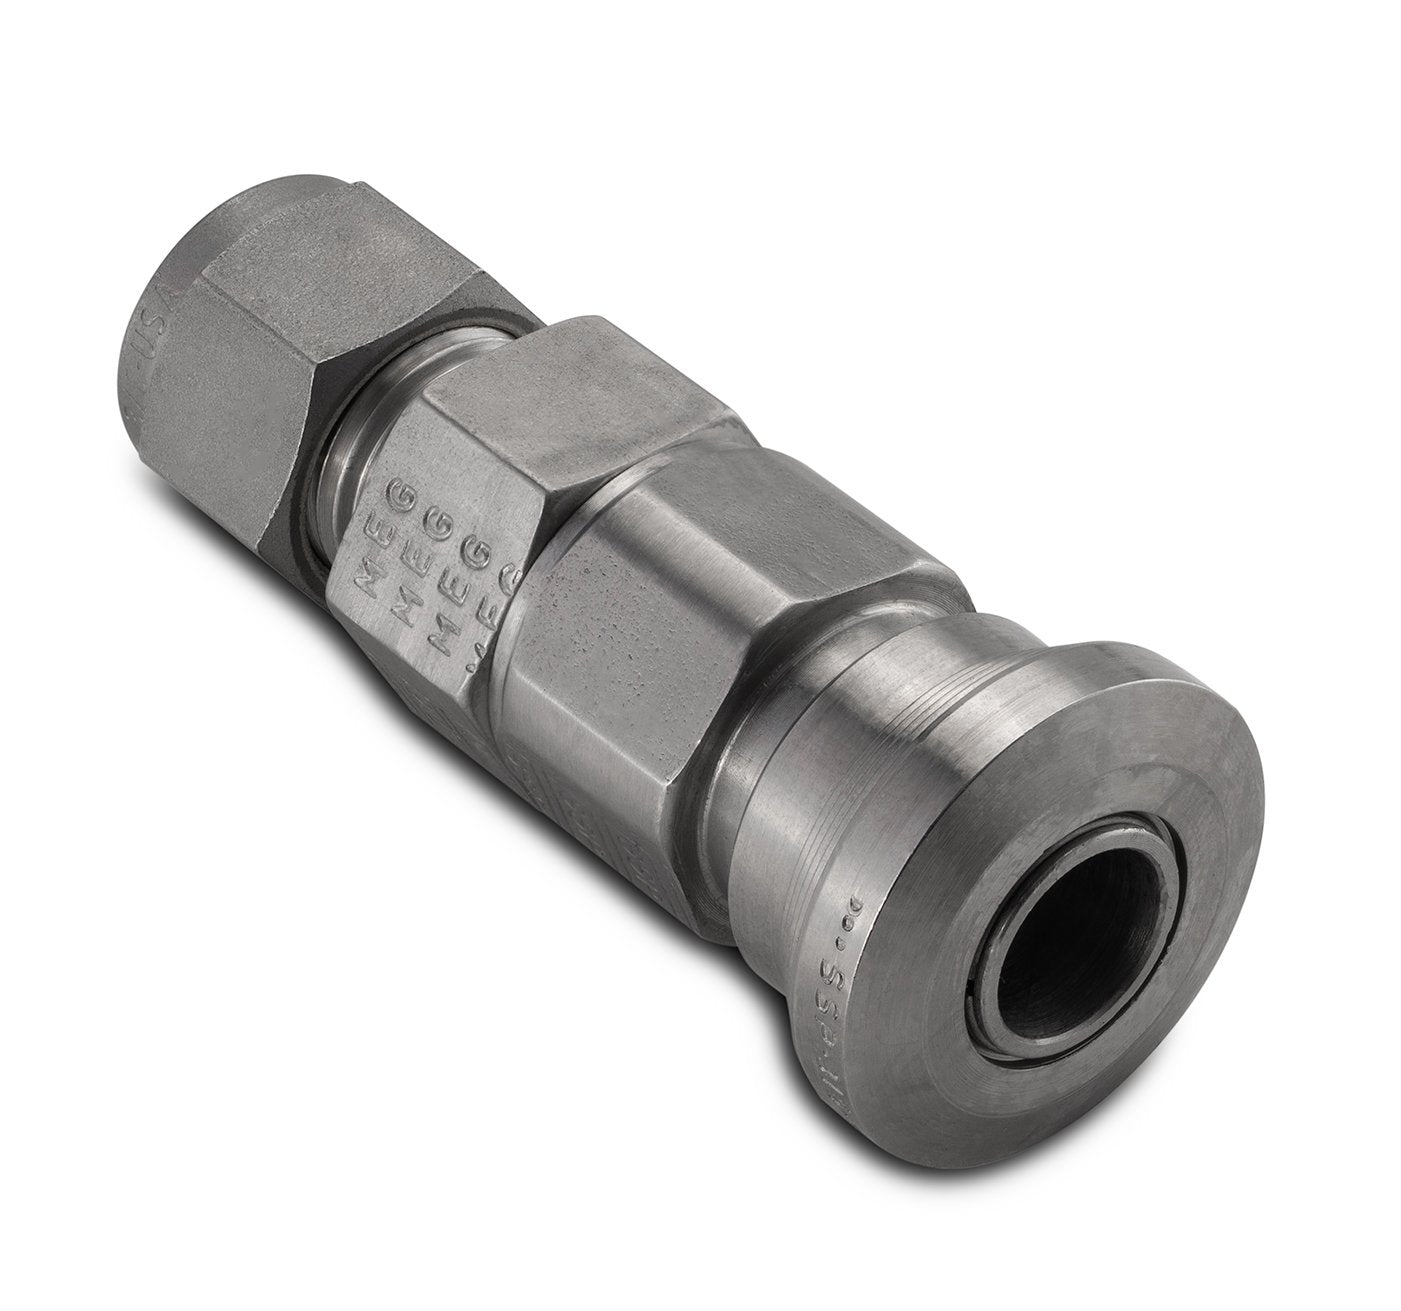 Quick Disconnect - Fractional Tube Fitting - BODY Shop All Categories SSP Corporation 